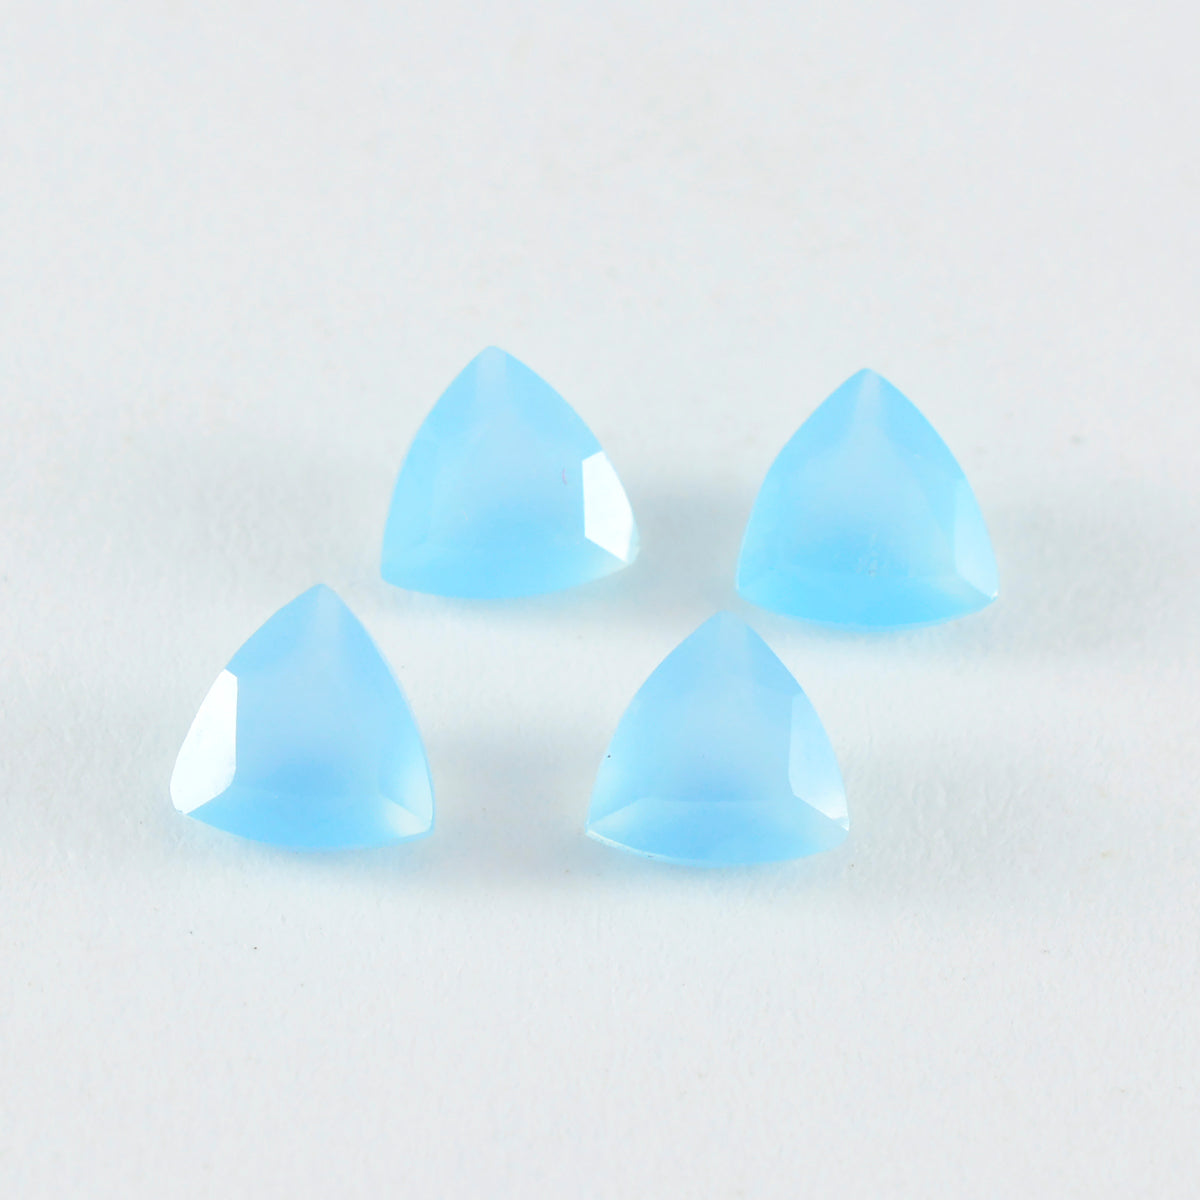 Riyogems 1PC Natural Blue Chalcedony Faceted 7x7 mm Trillion Shape lovely Quality Gems